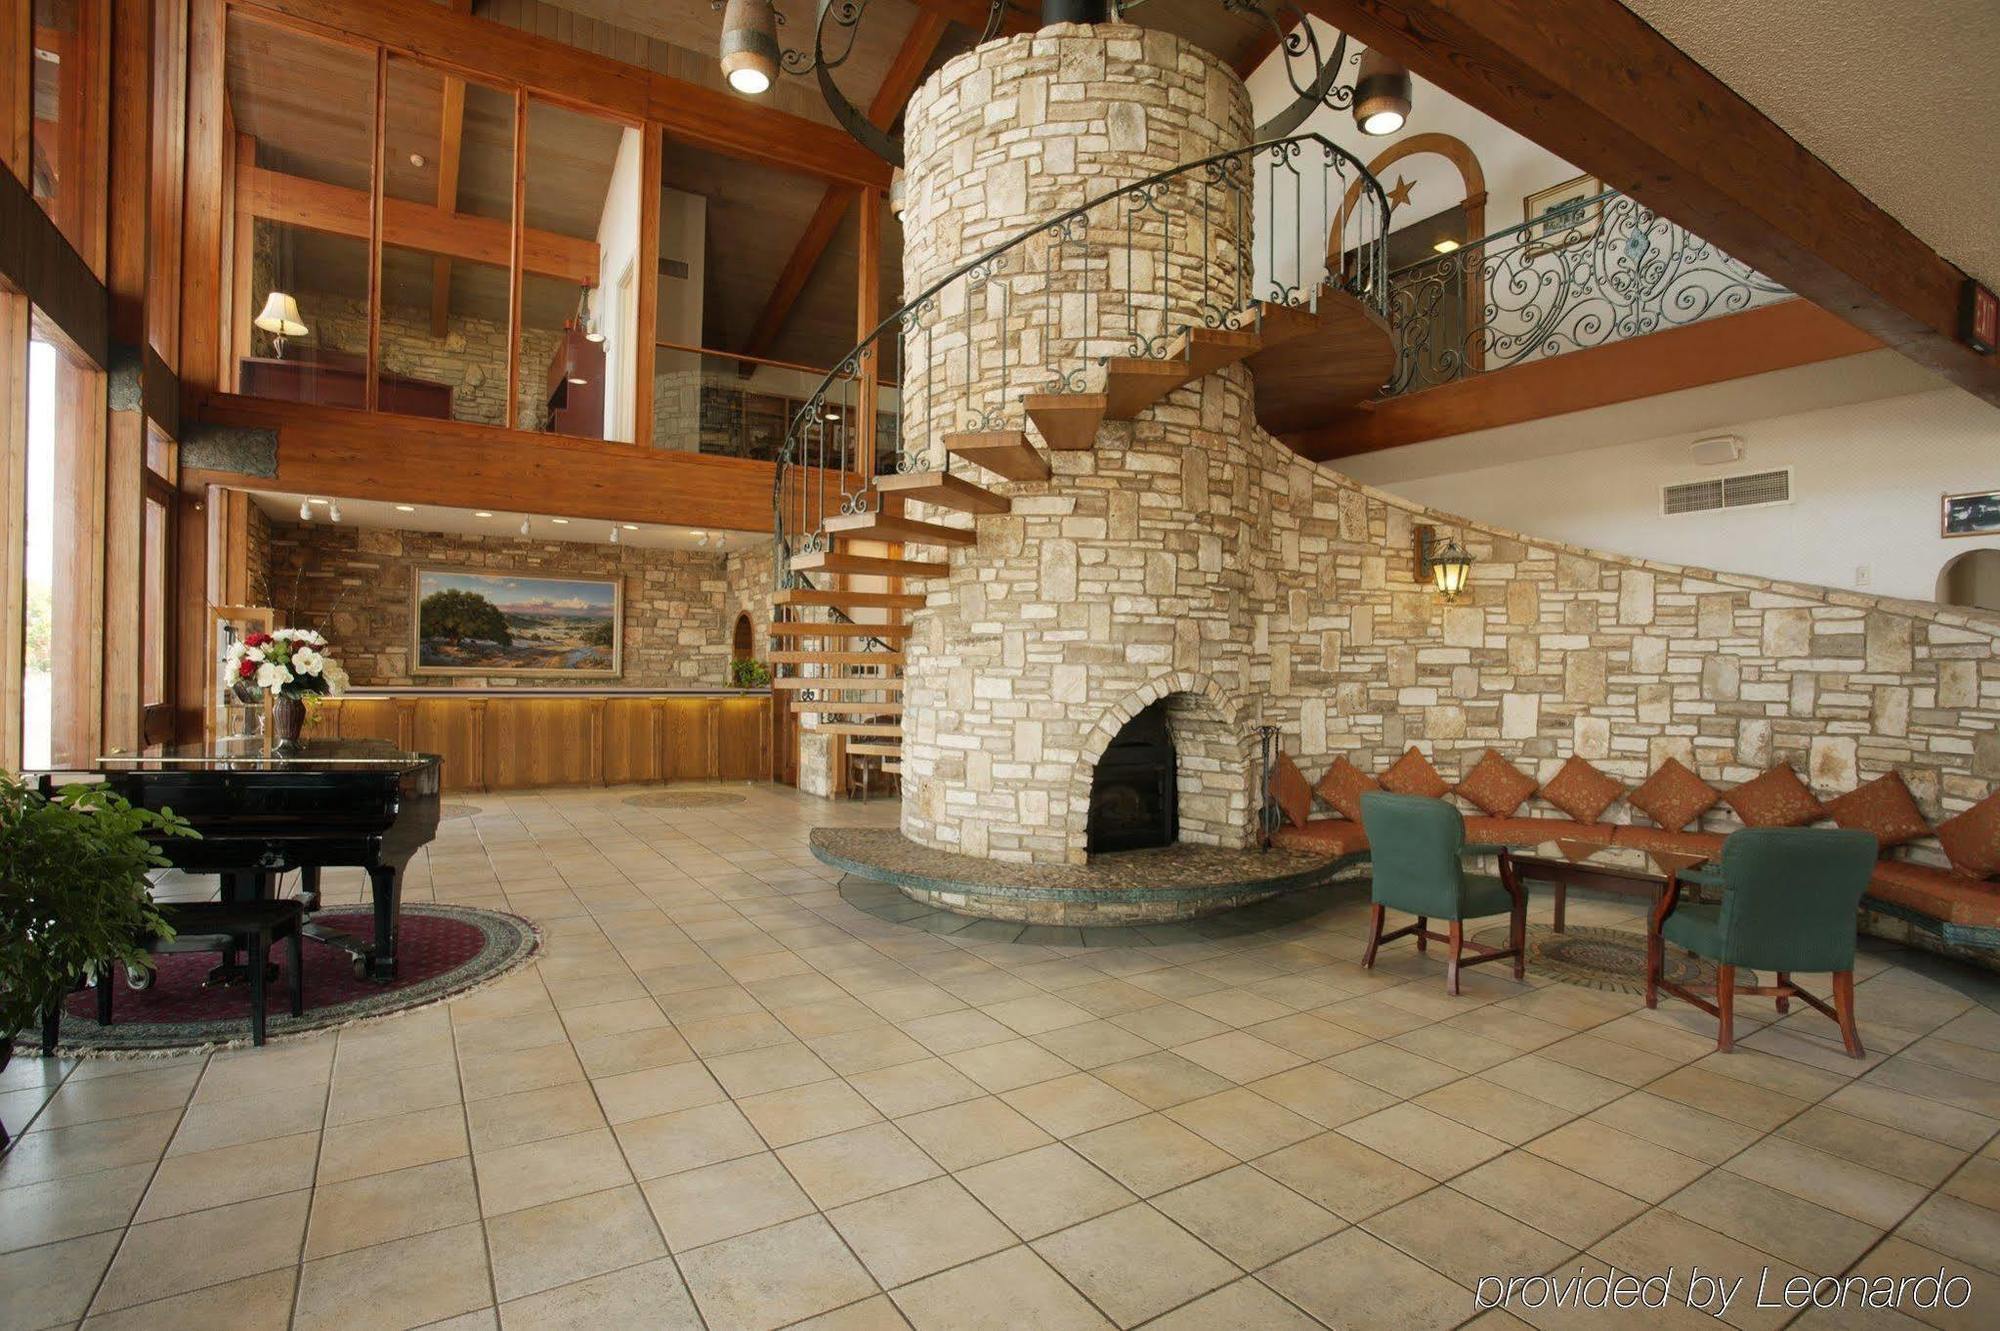 Inn Of The Hills Hotel And Conference Center Kerrville Interior photo